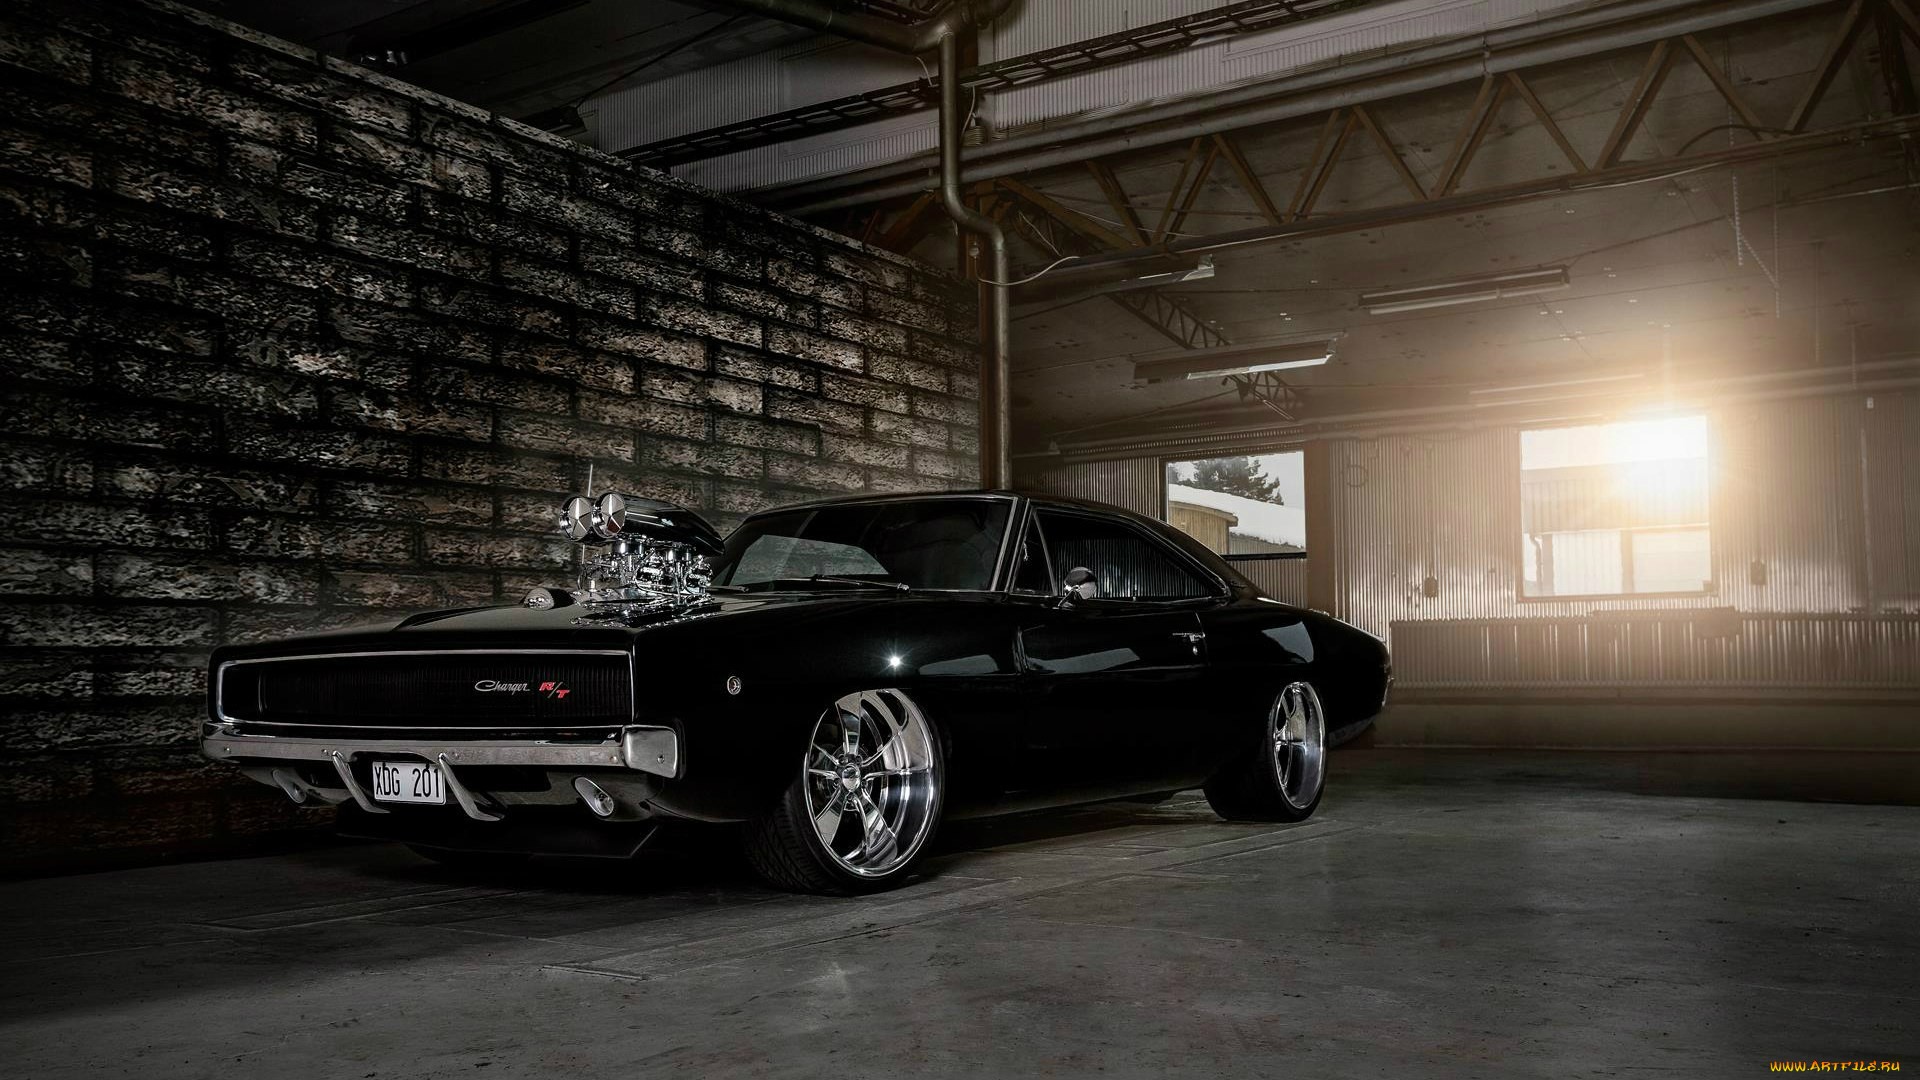 Dodge Charger 1968 muscle cars hot rod engine wallpaper 1920x1080 1920x1080